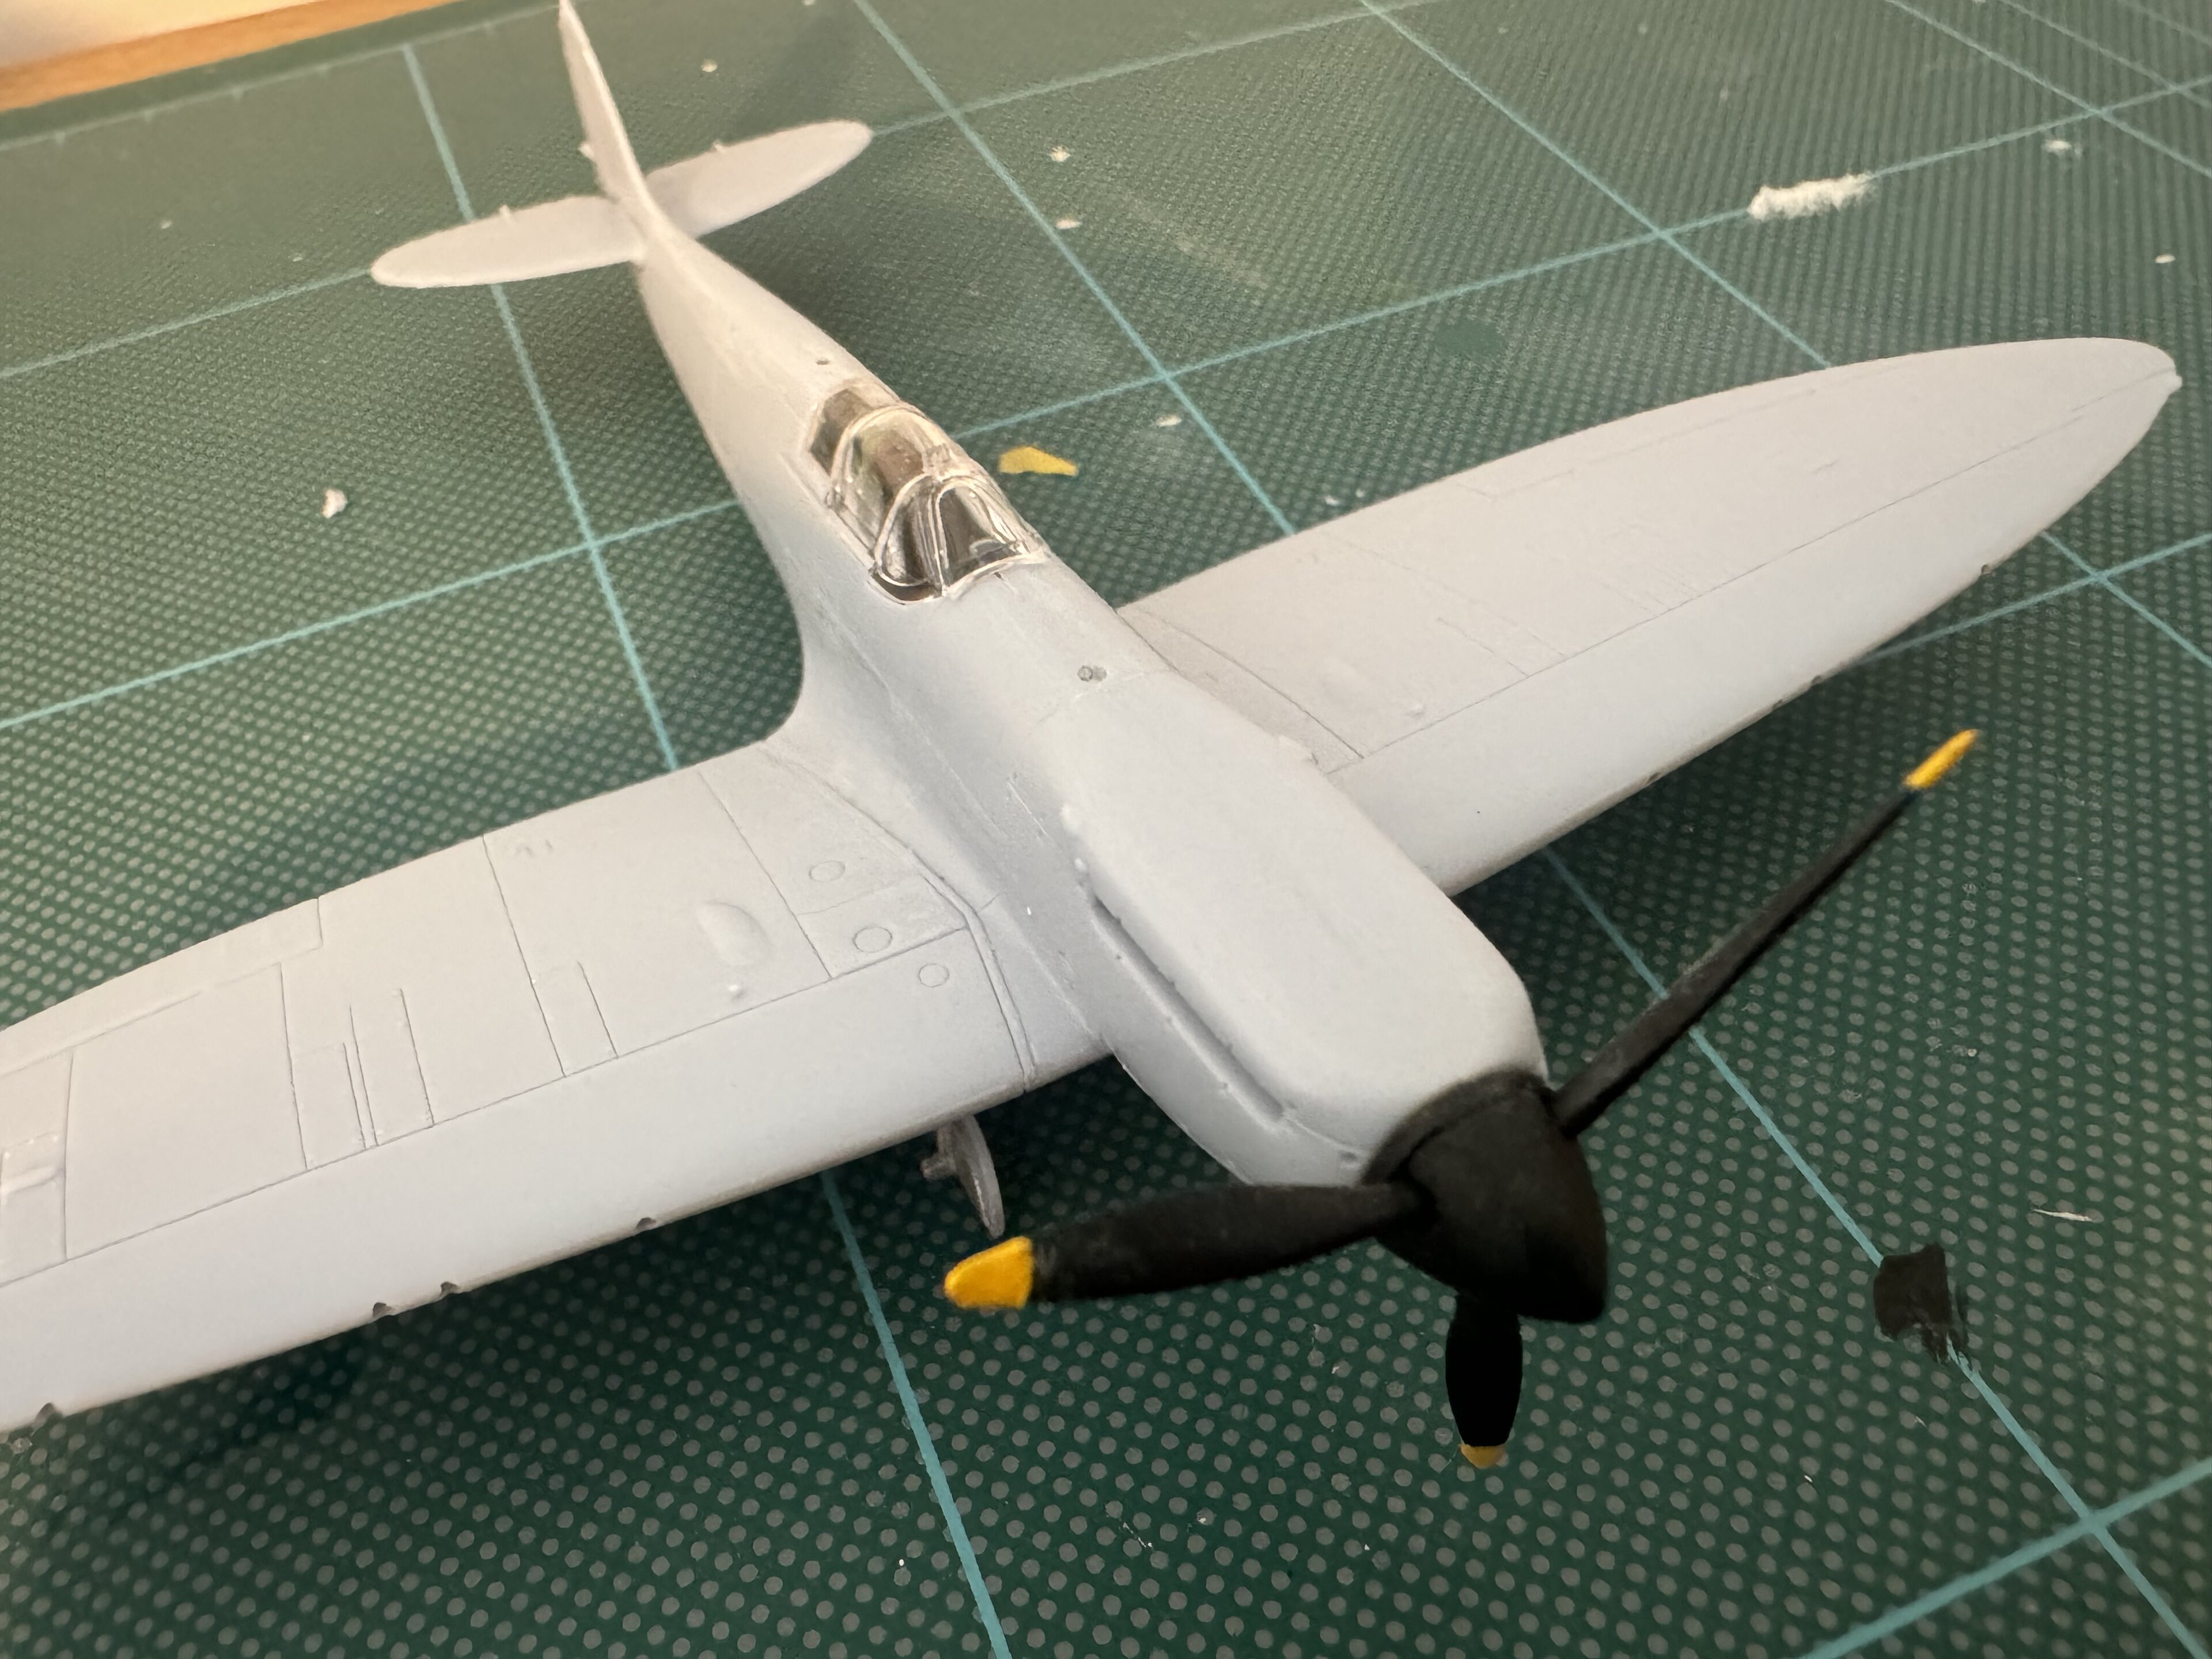 Pistonheads - This image shows a model plane, painted in white with accents of yellow and black. The model is designed to resemble an old-style biplane, featuring two sets of wings stacked one above the other. The propeller, which is at the front, has a propeller blade attached. The model airplane is placed on a tabletop surface with a grid pattern. There are no texts or people present in this image.